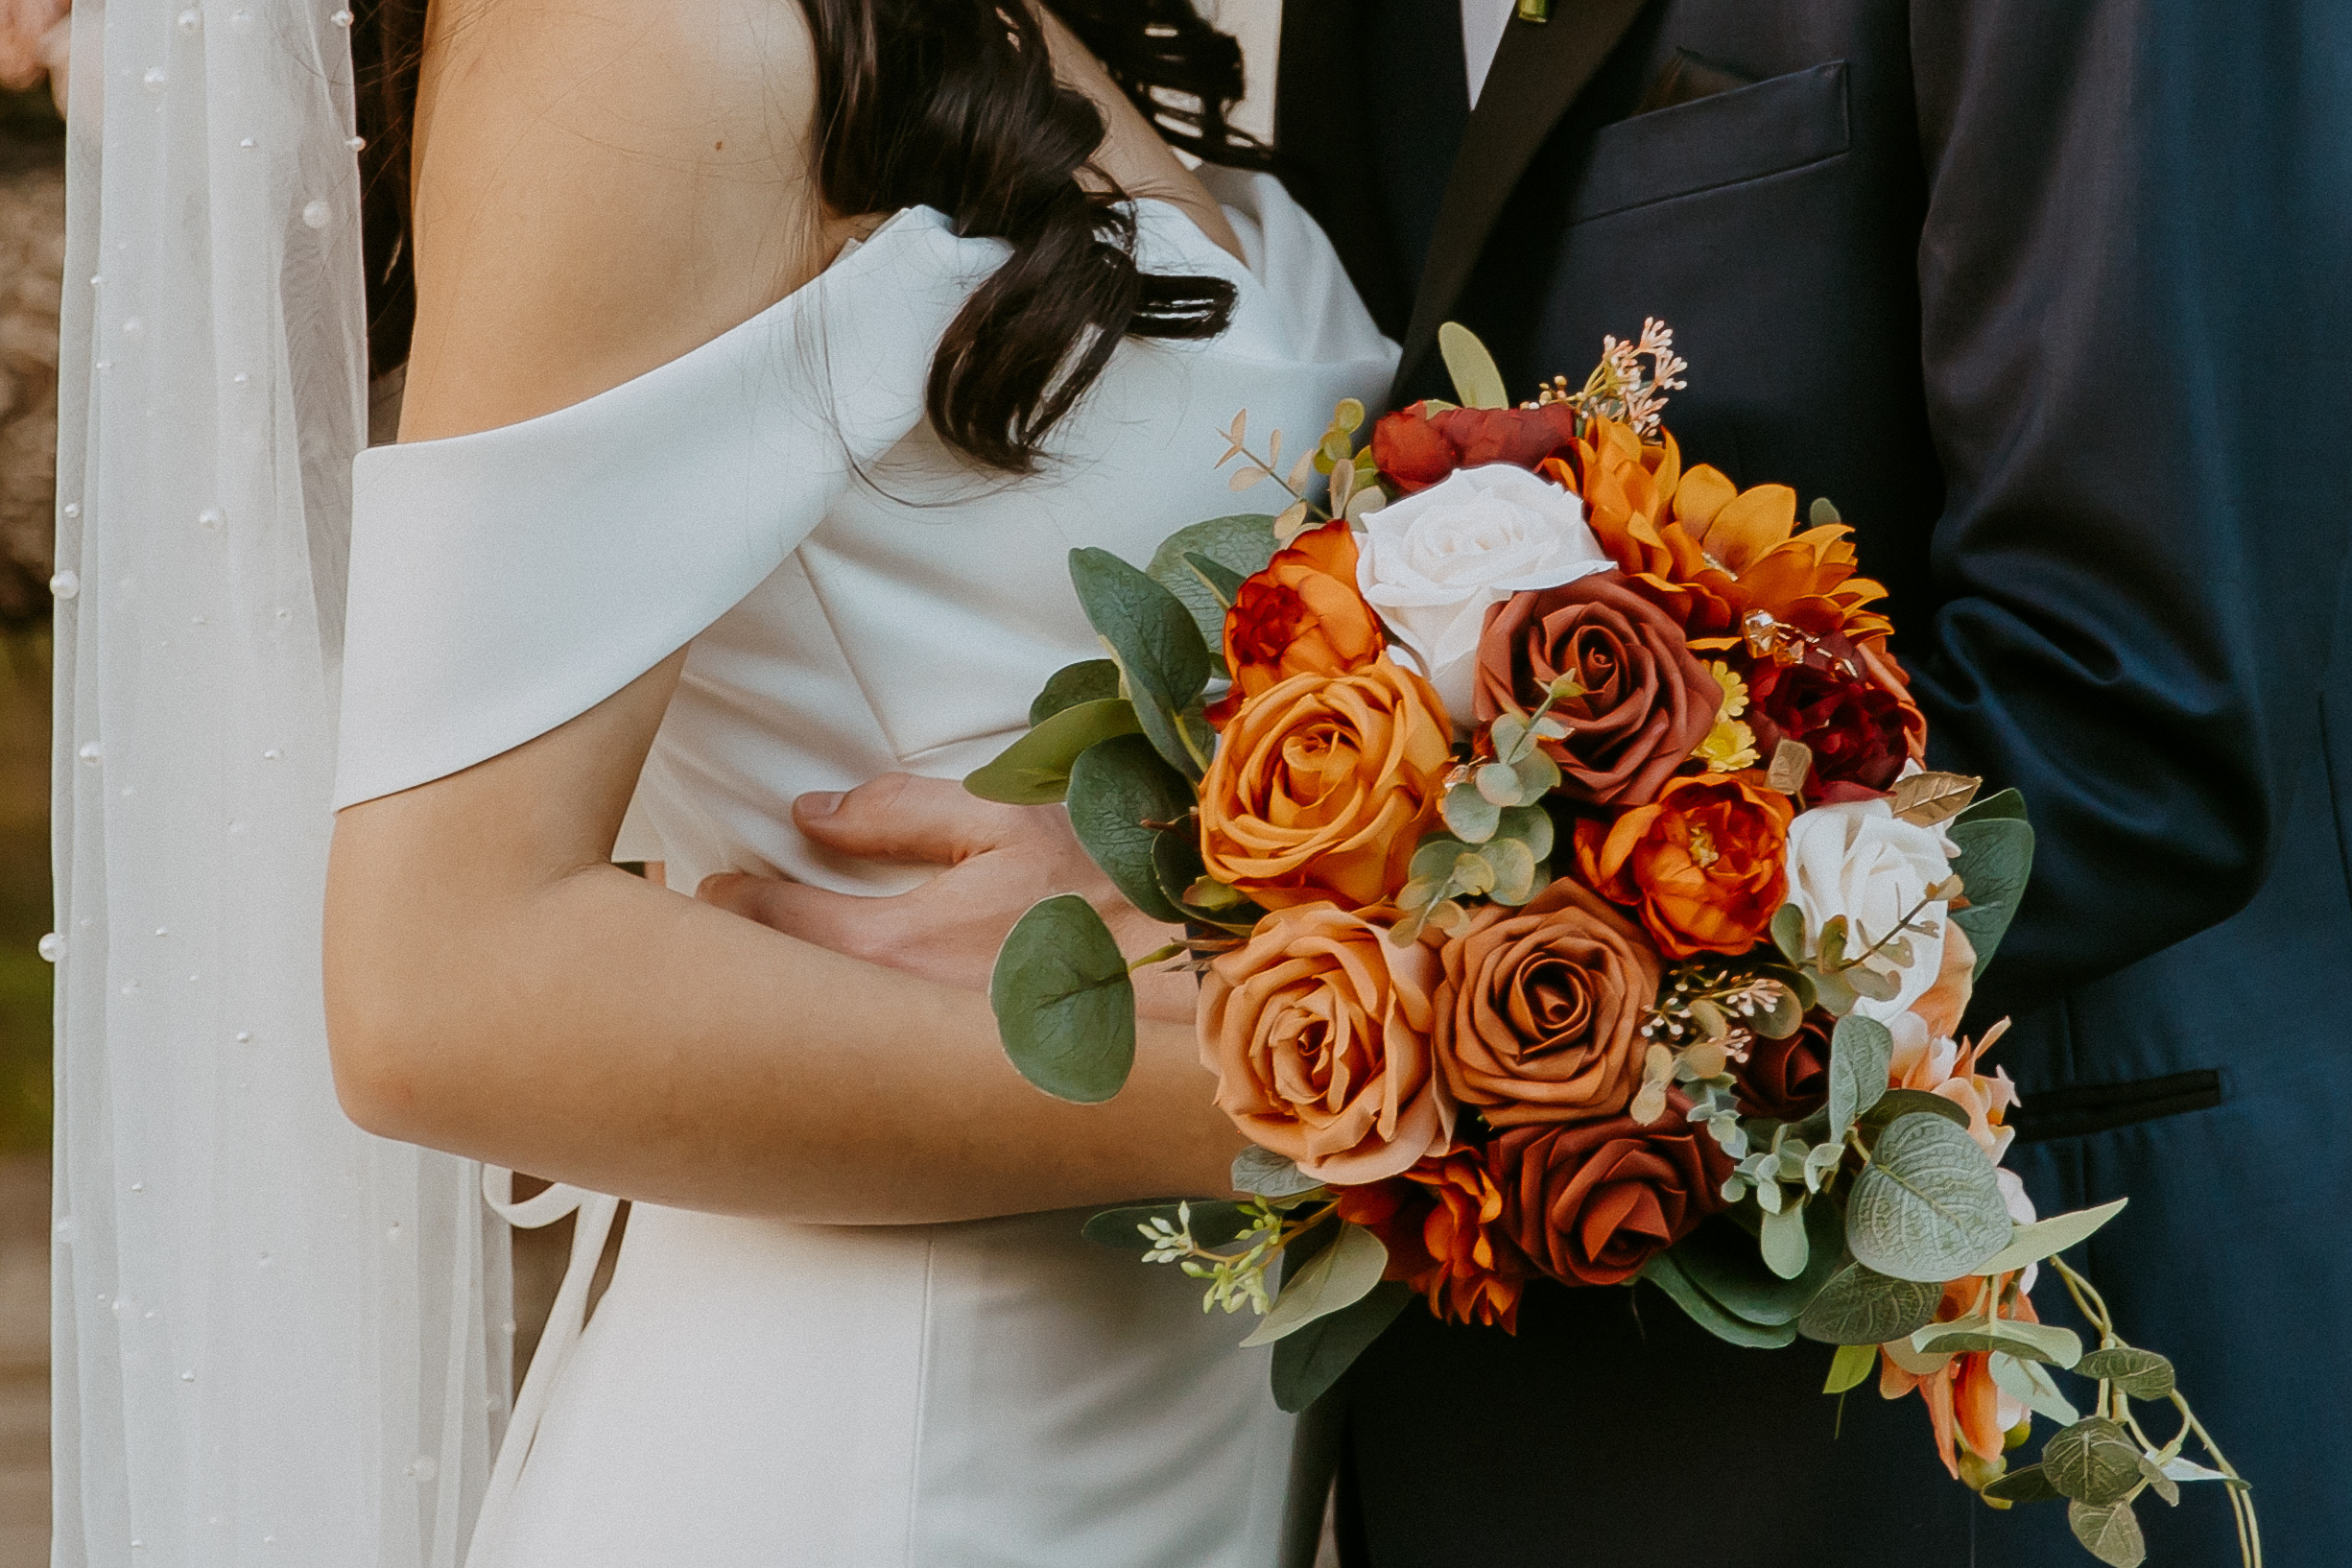 A close-up of a bride and groom holding a vibrant bouquet of flowers.